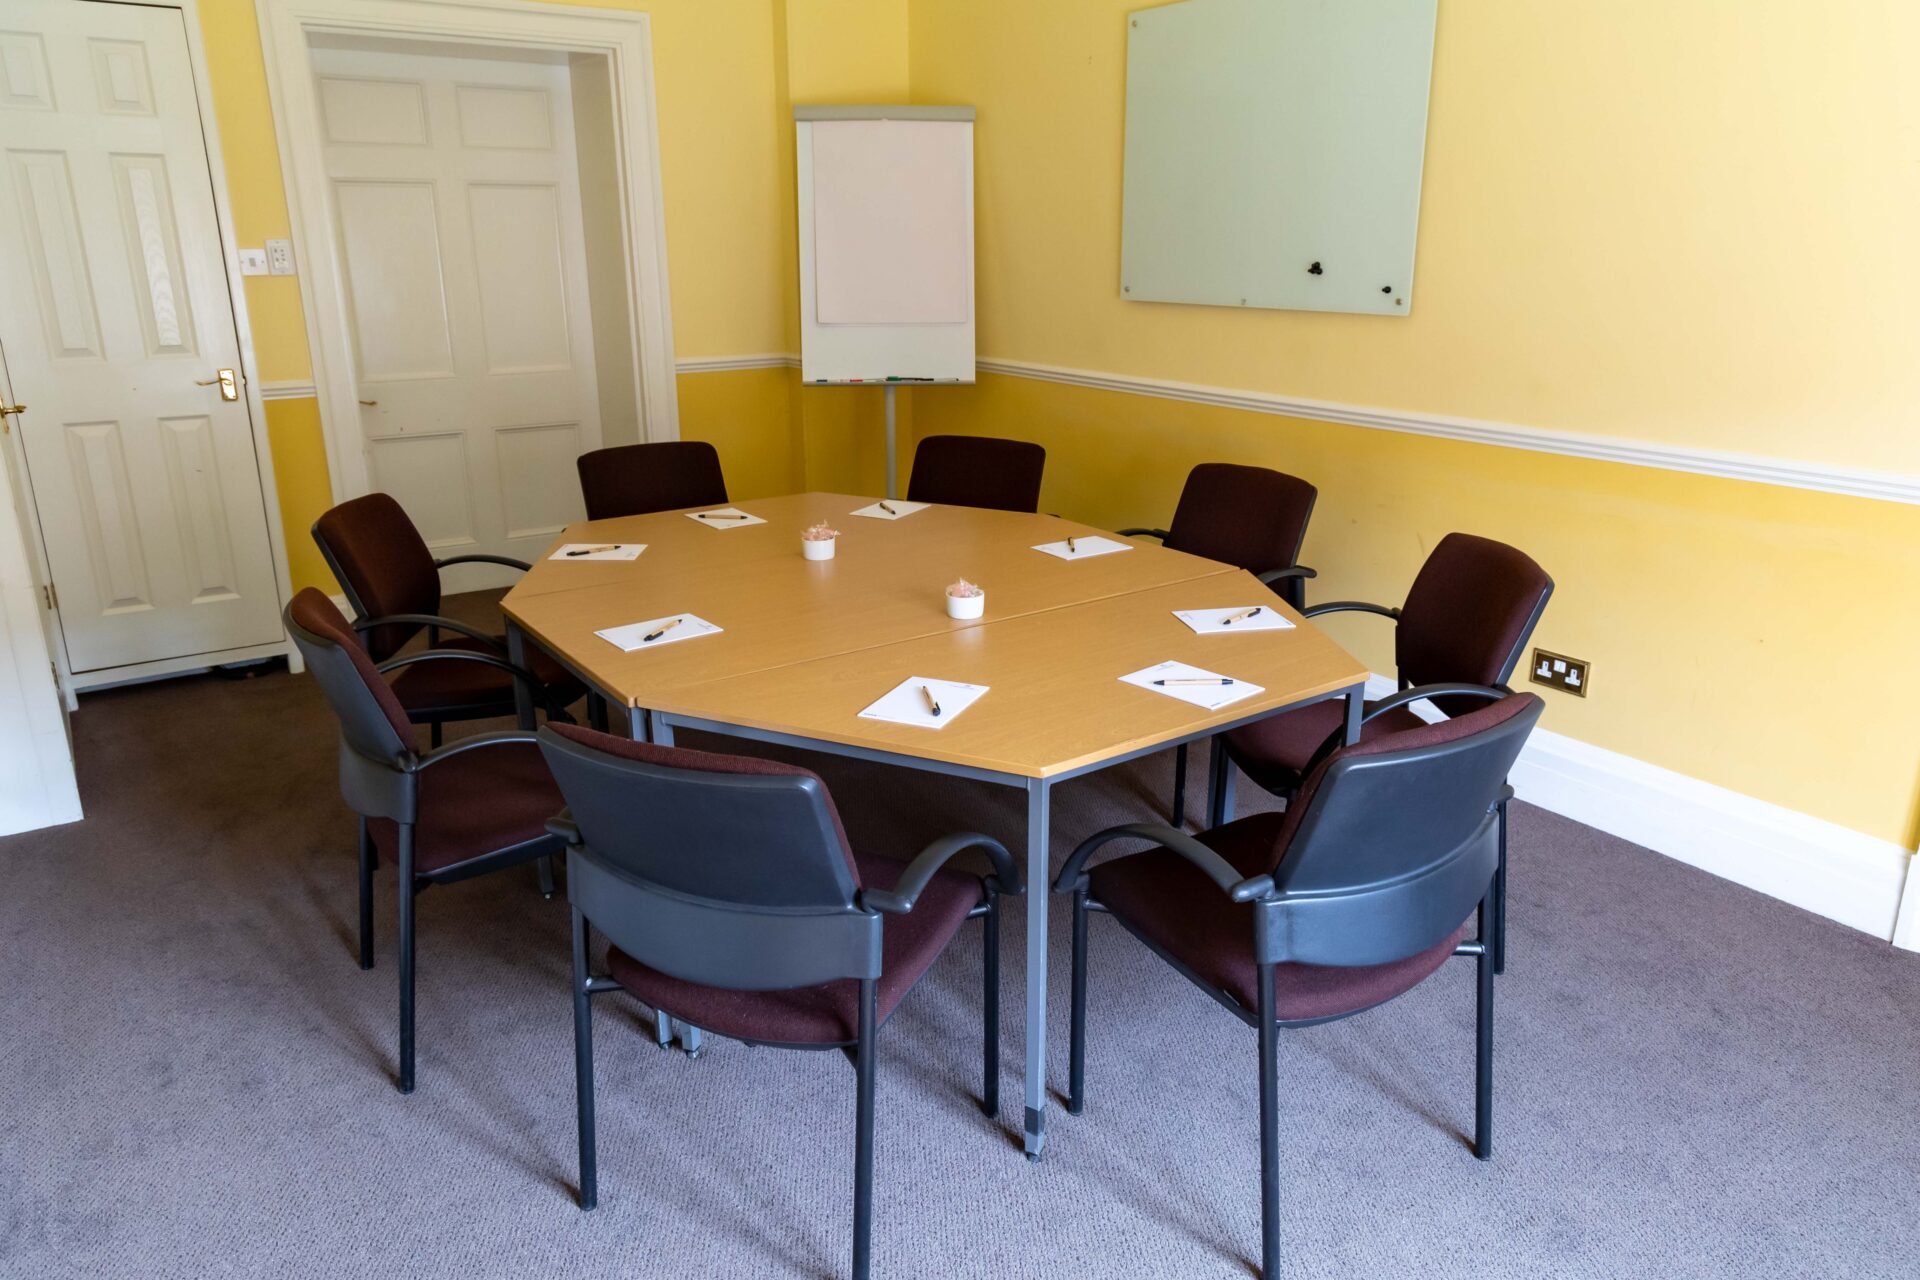 The Windham breakout room, laid out to accommodate eight people.